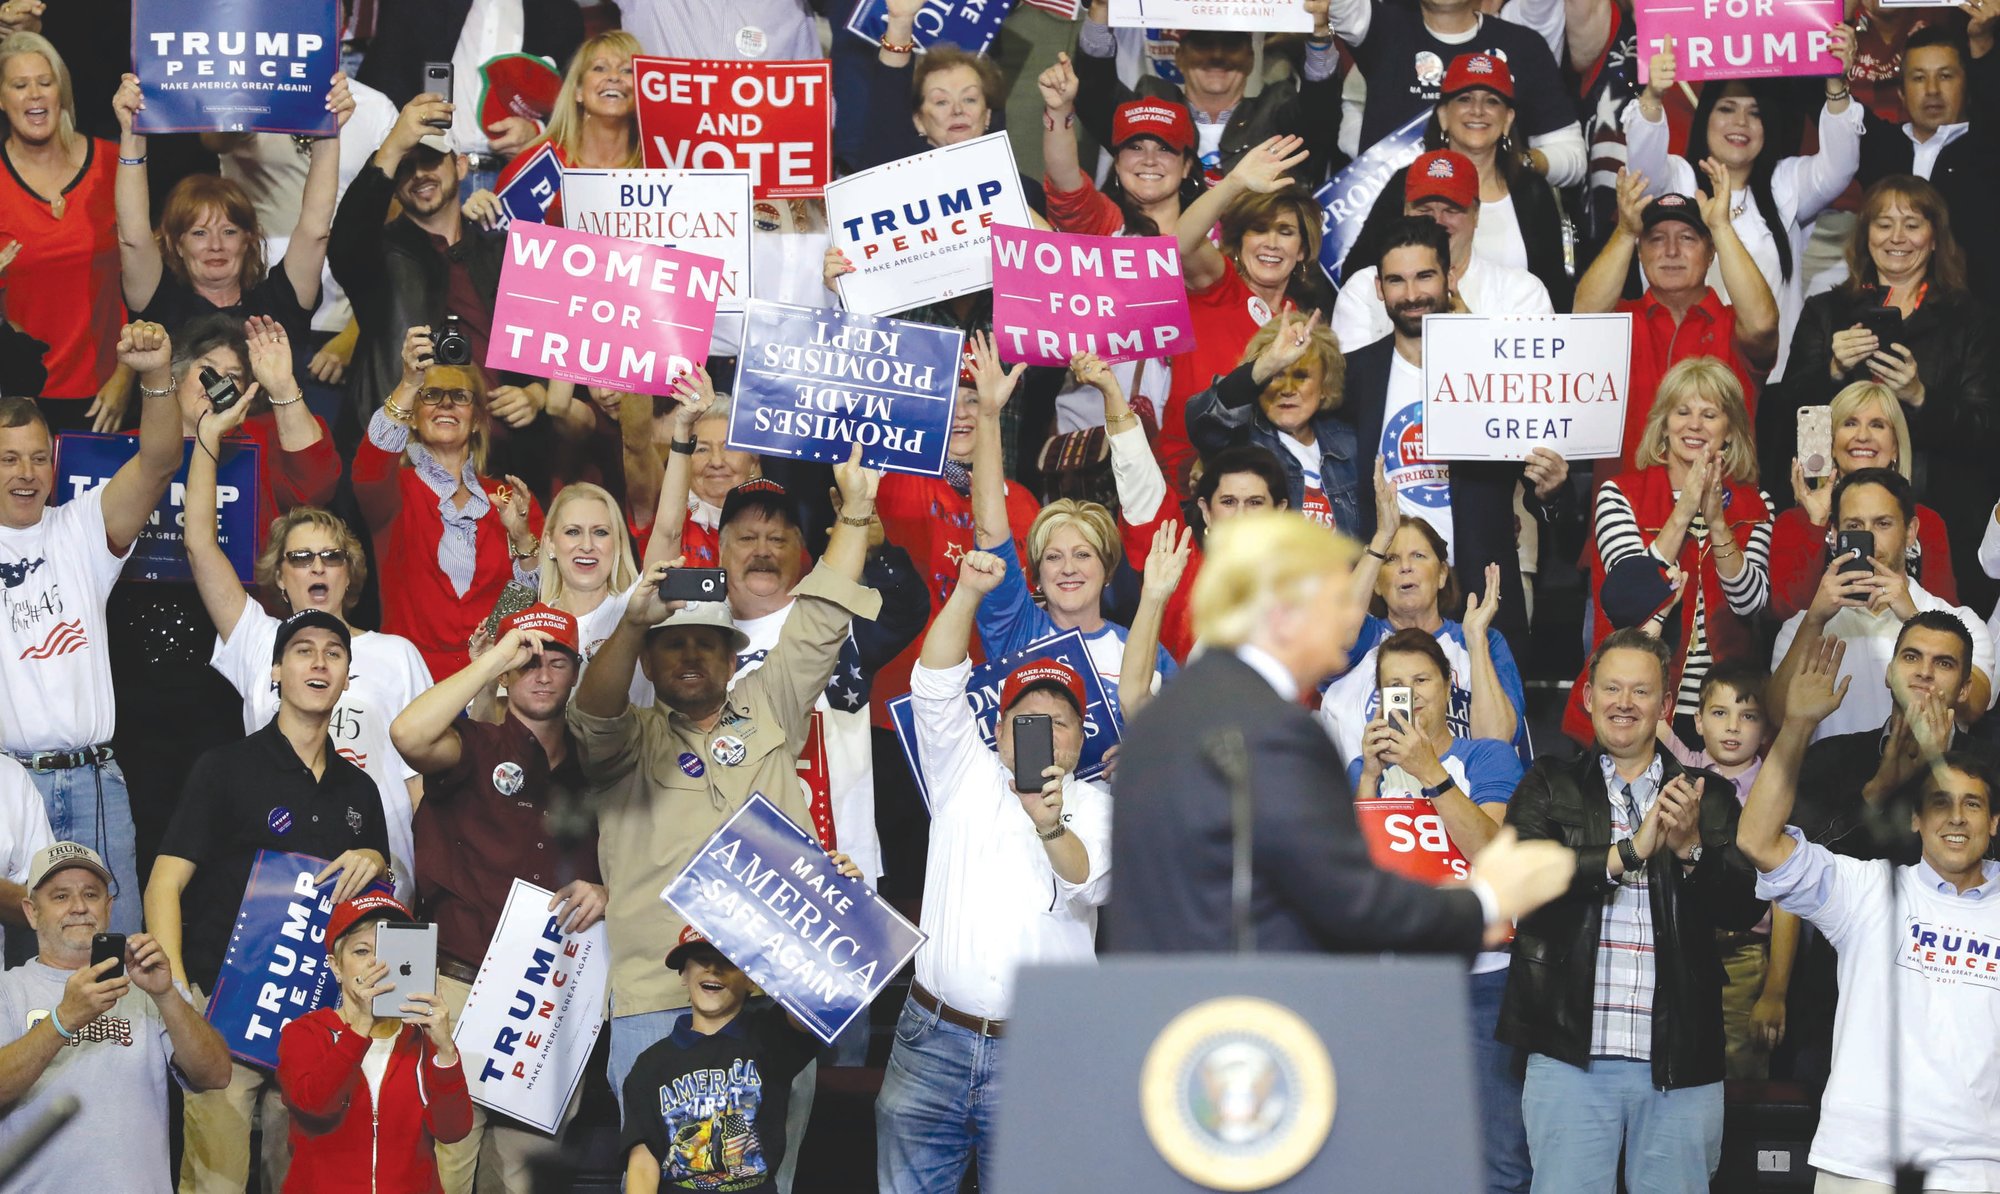 Supporters cheer for President Donald Trump during a campaign rally Monday in Houston.